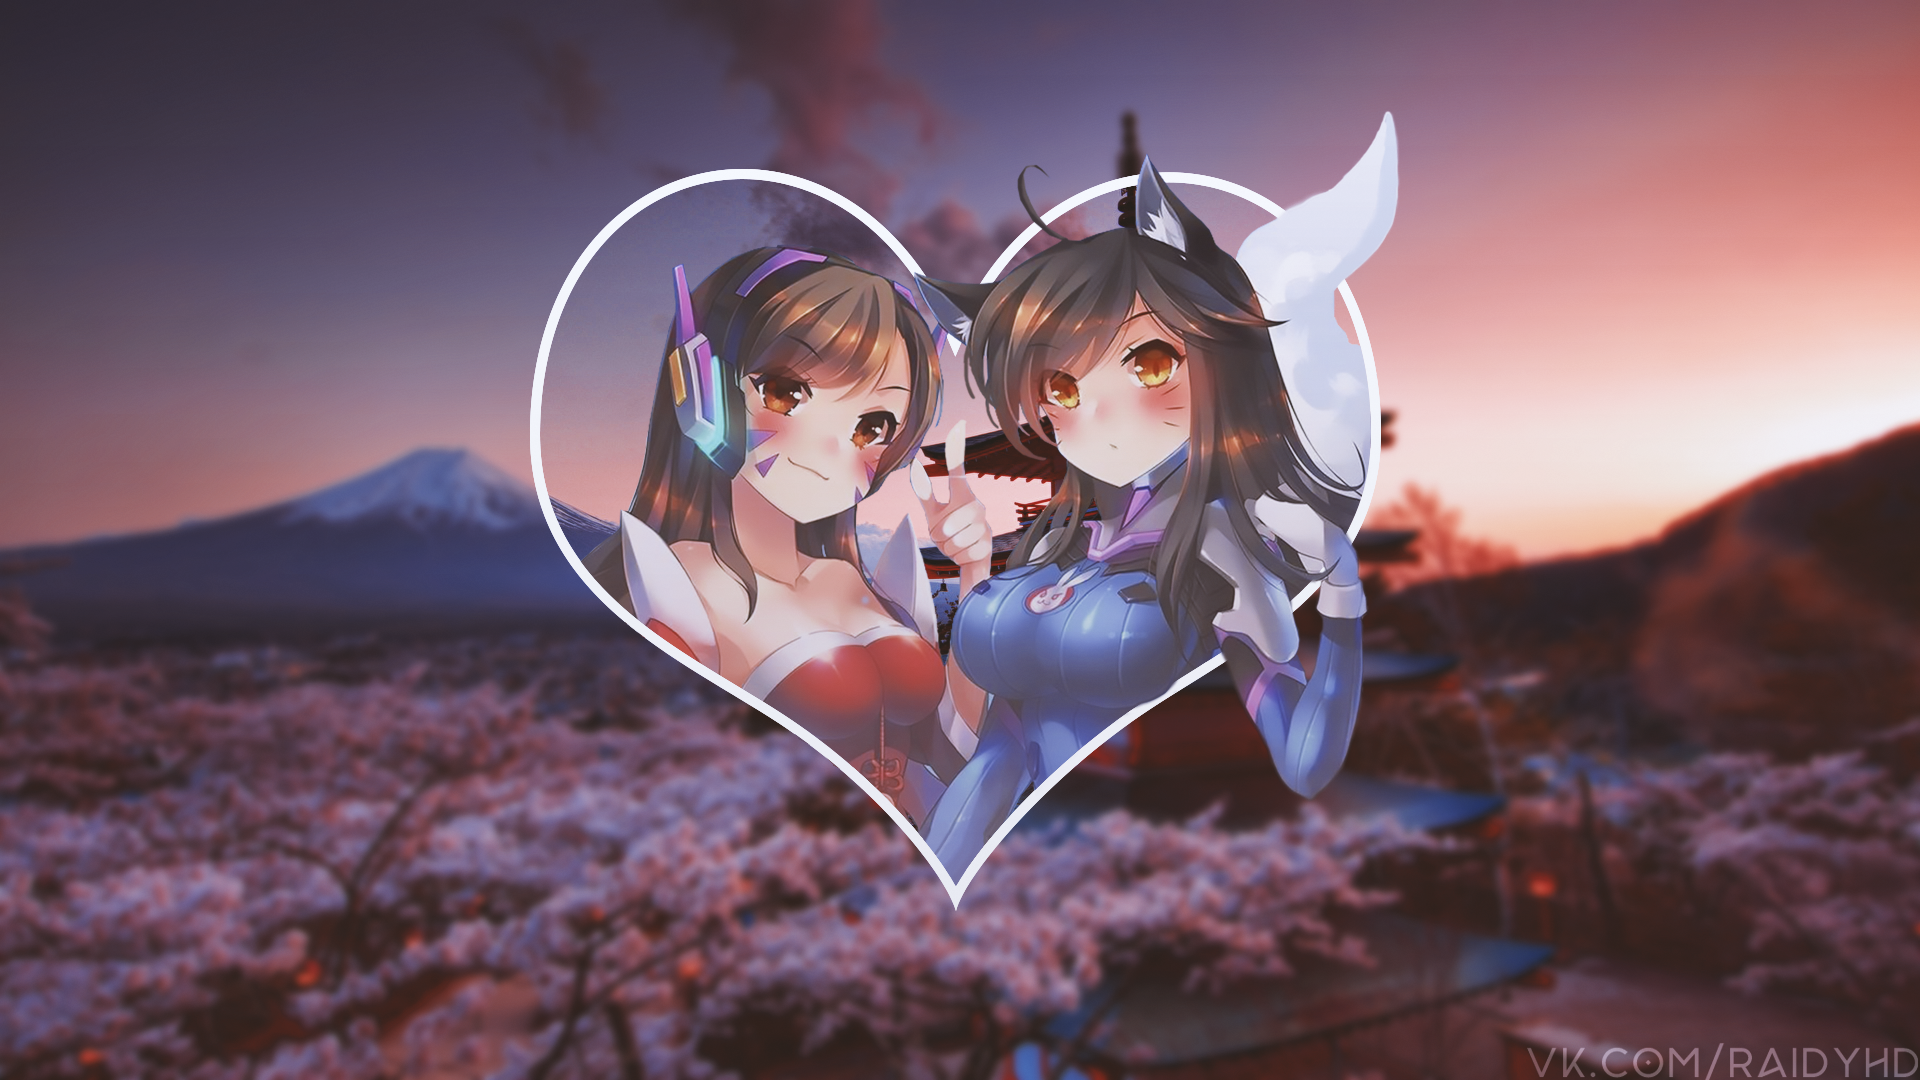 Anime Picture In Picture Anime Girls Diva Overwatch 1920x1080